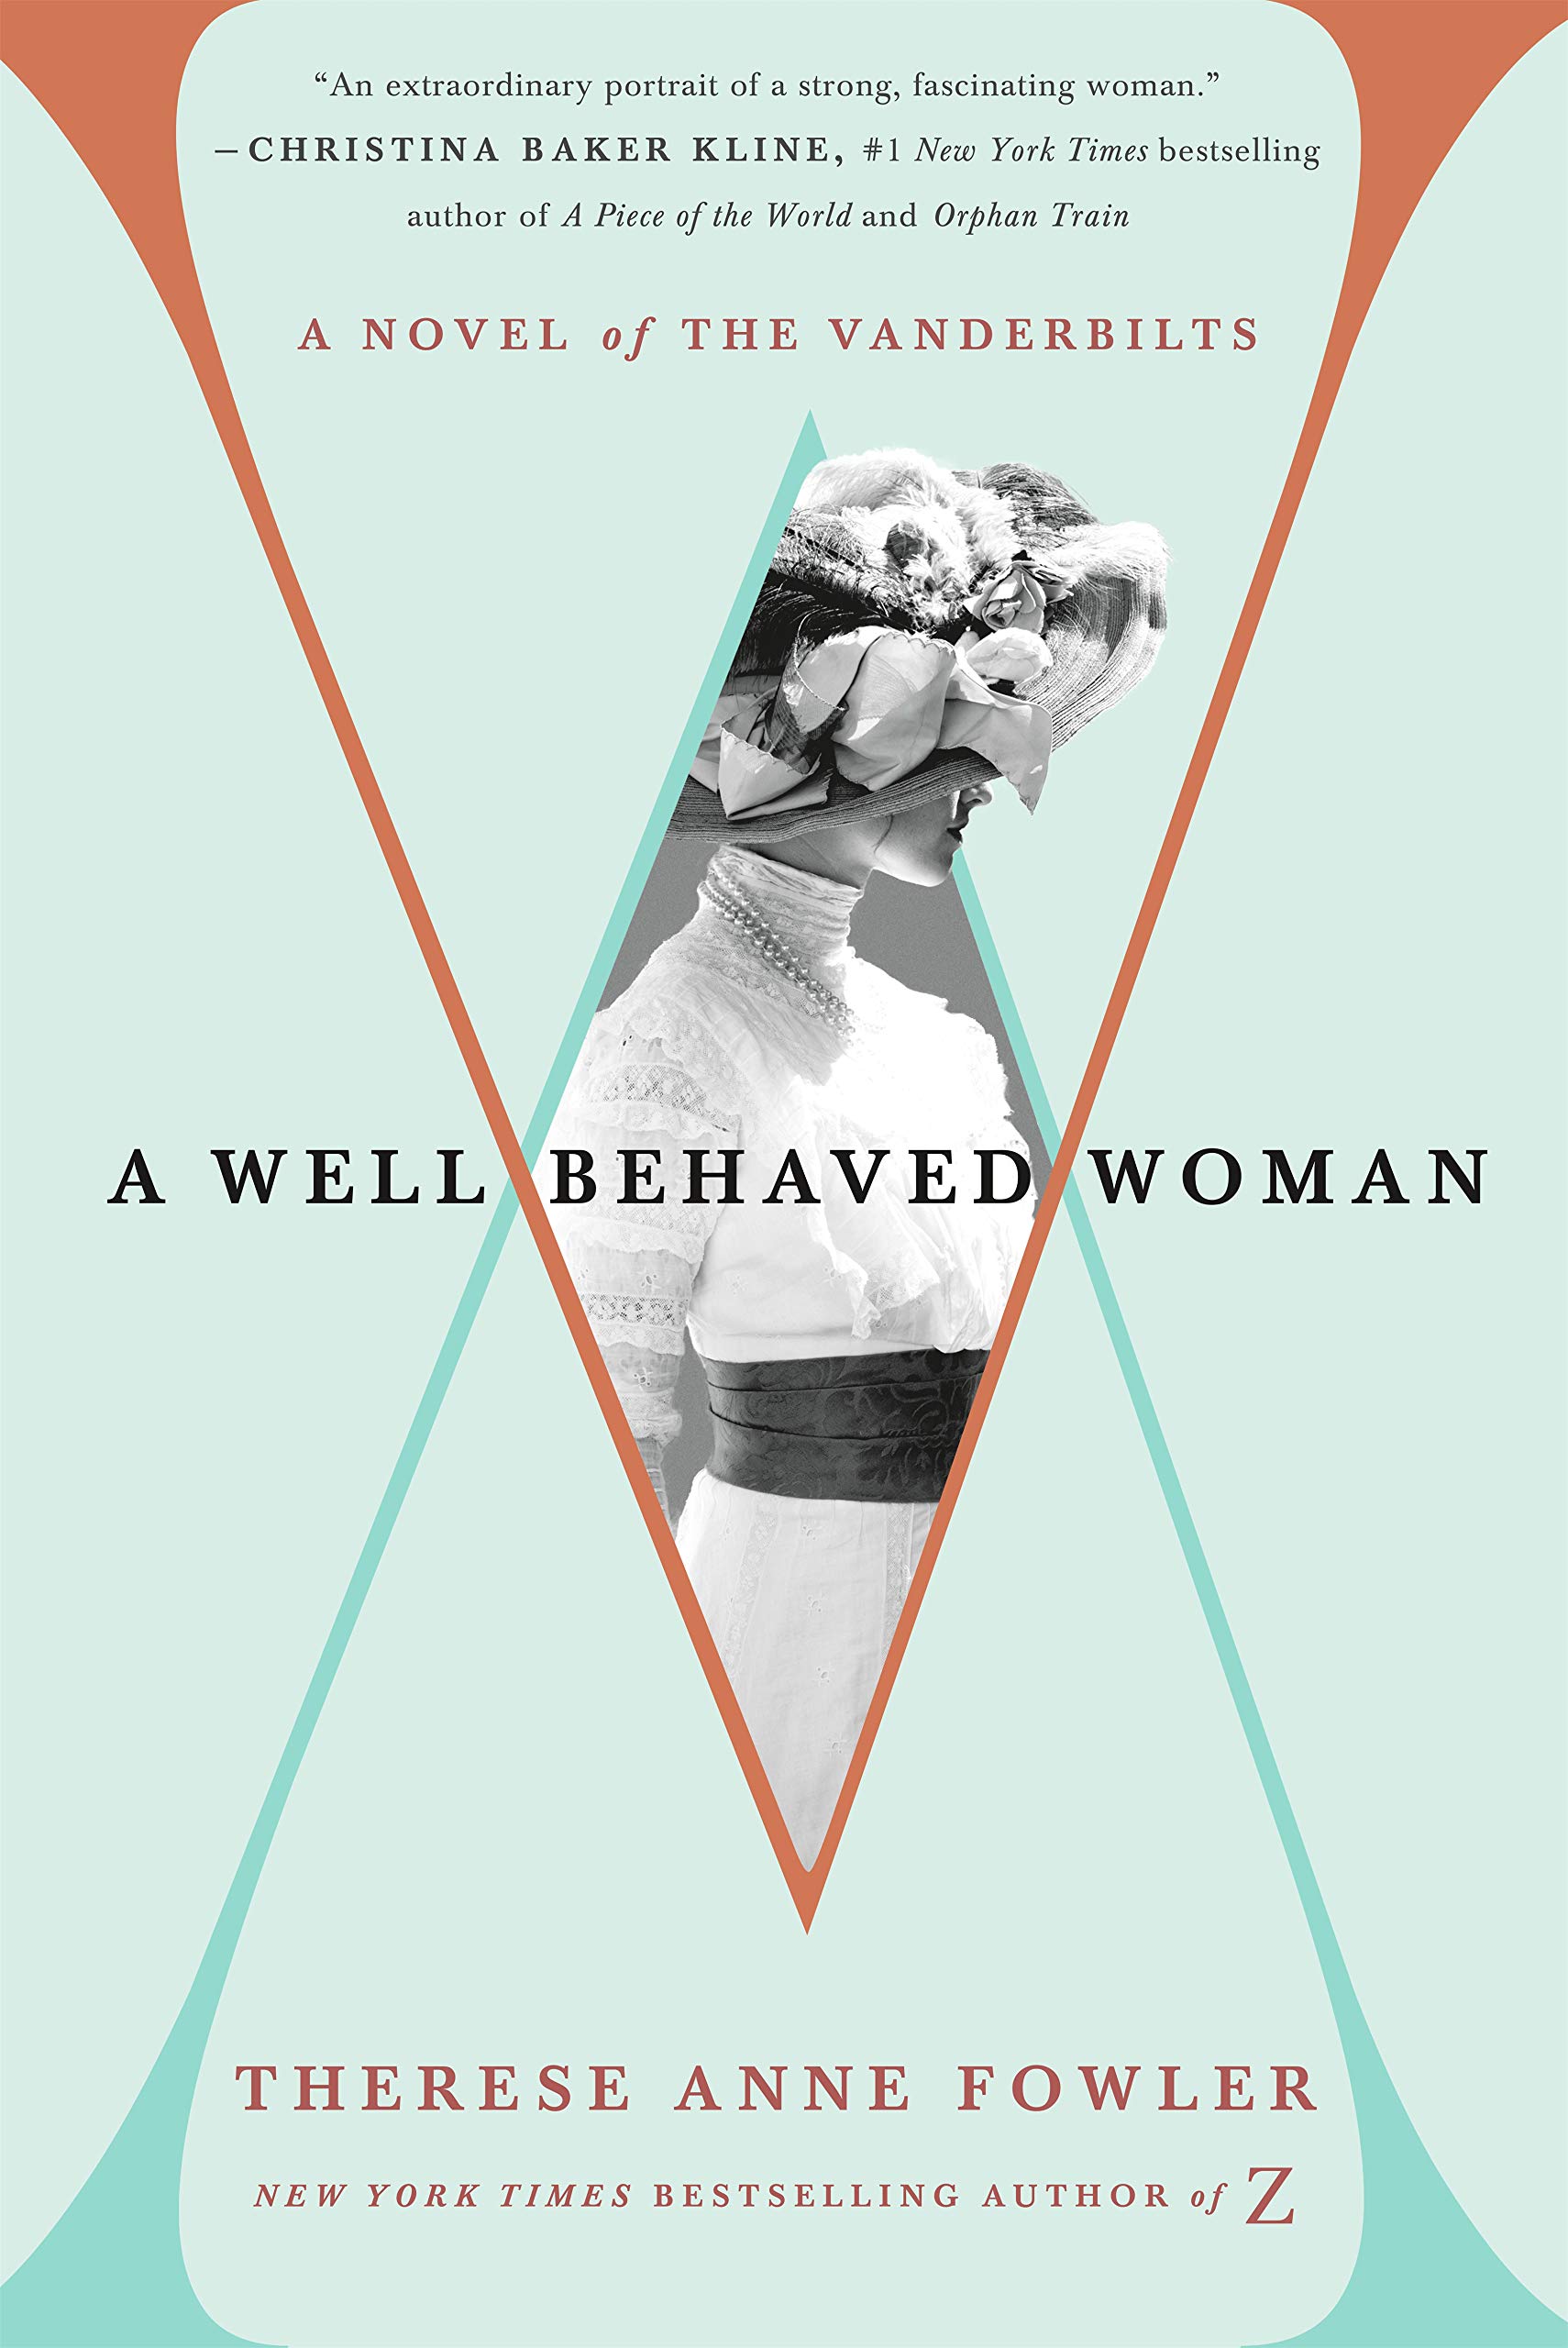 A Well-Behaved Woman by Therese Fowler